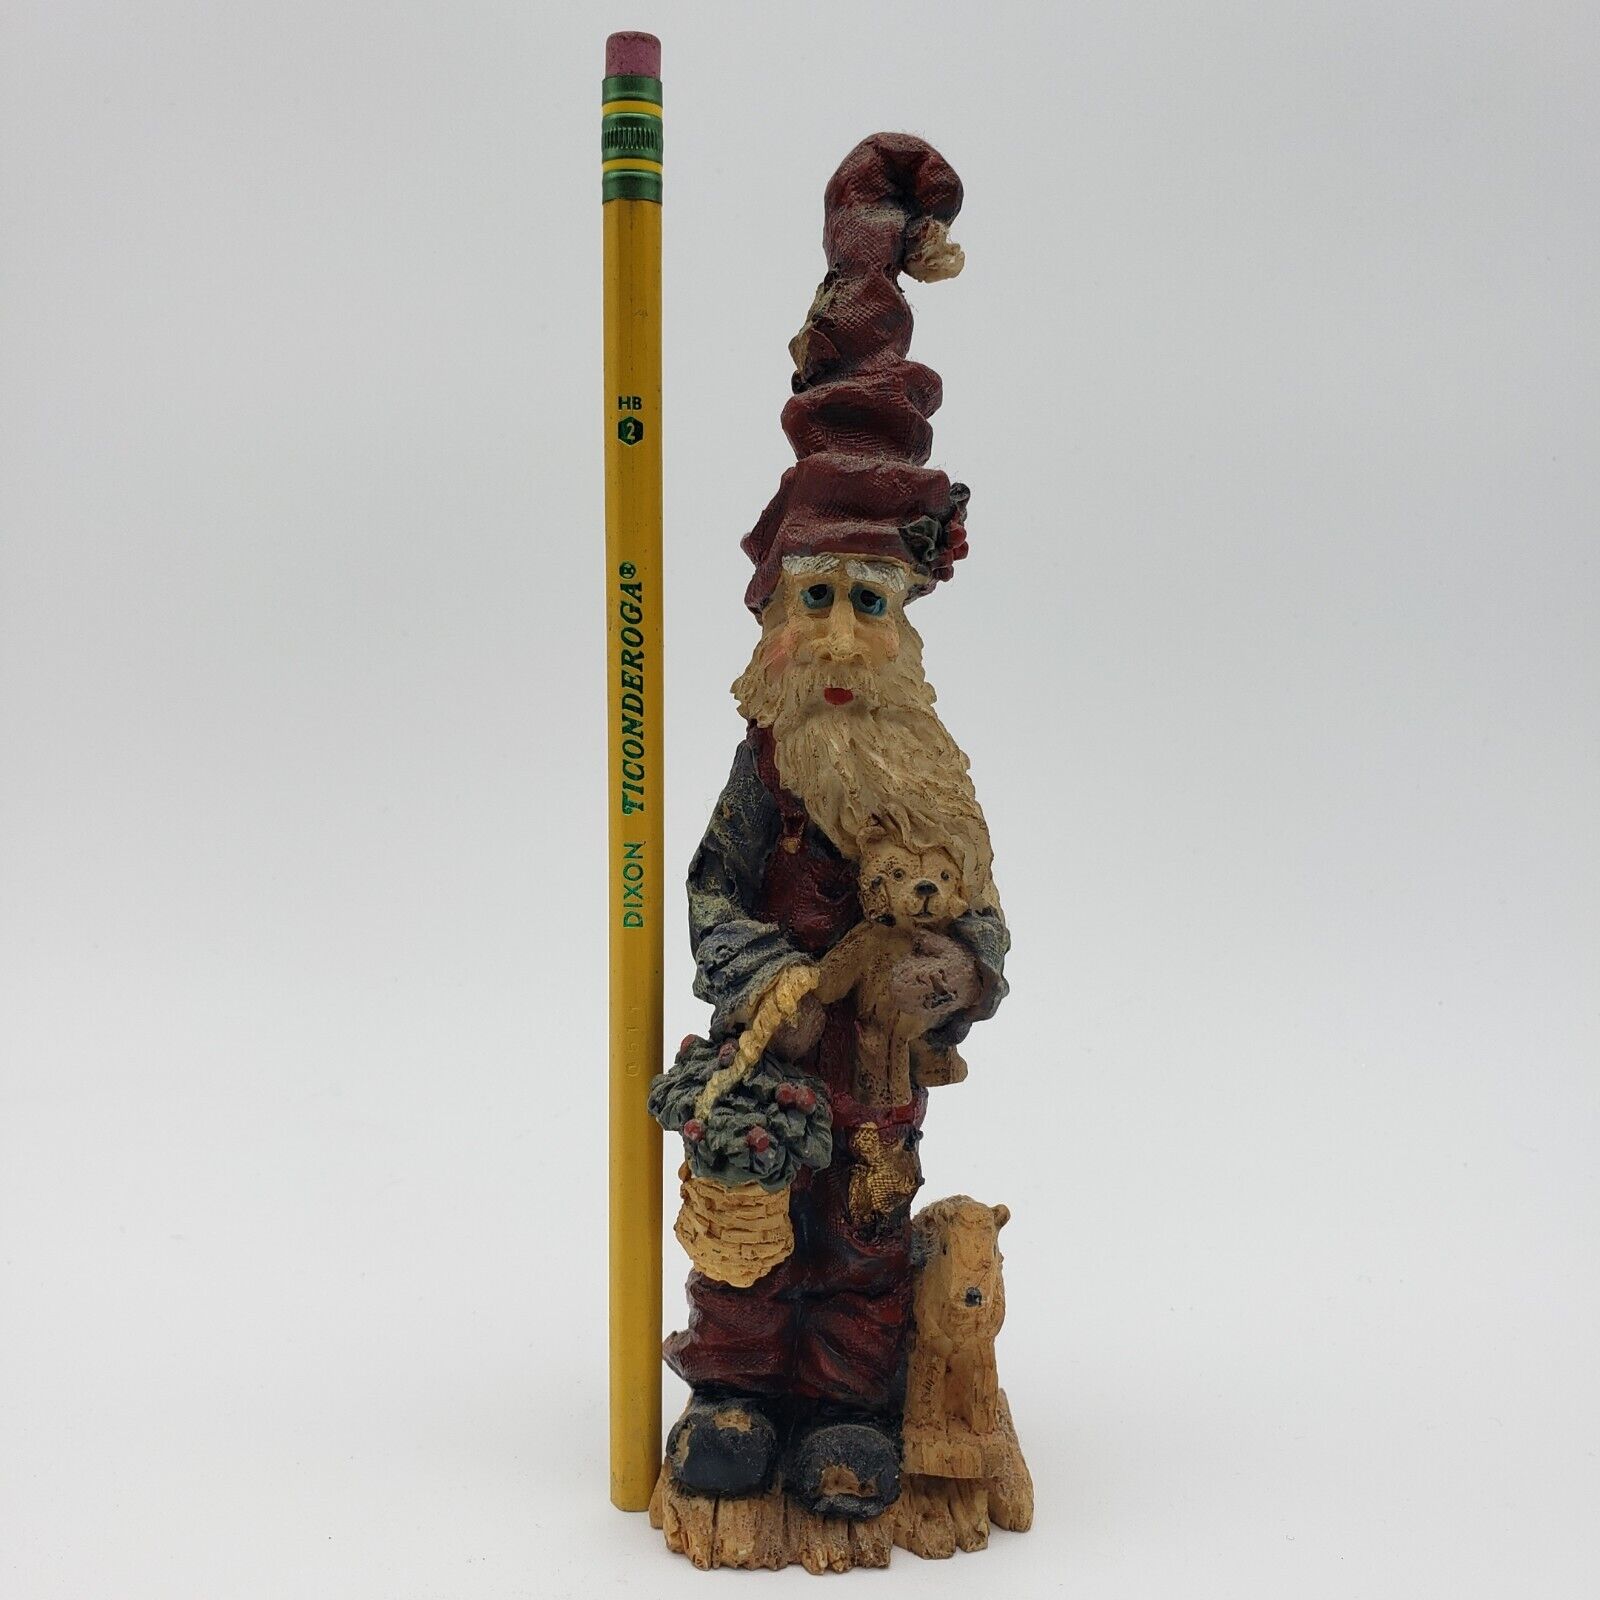 SANTA Humble Hobo Pencil Resin Figurine Jolly Old Elf Patches Bear Rocking Horse